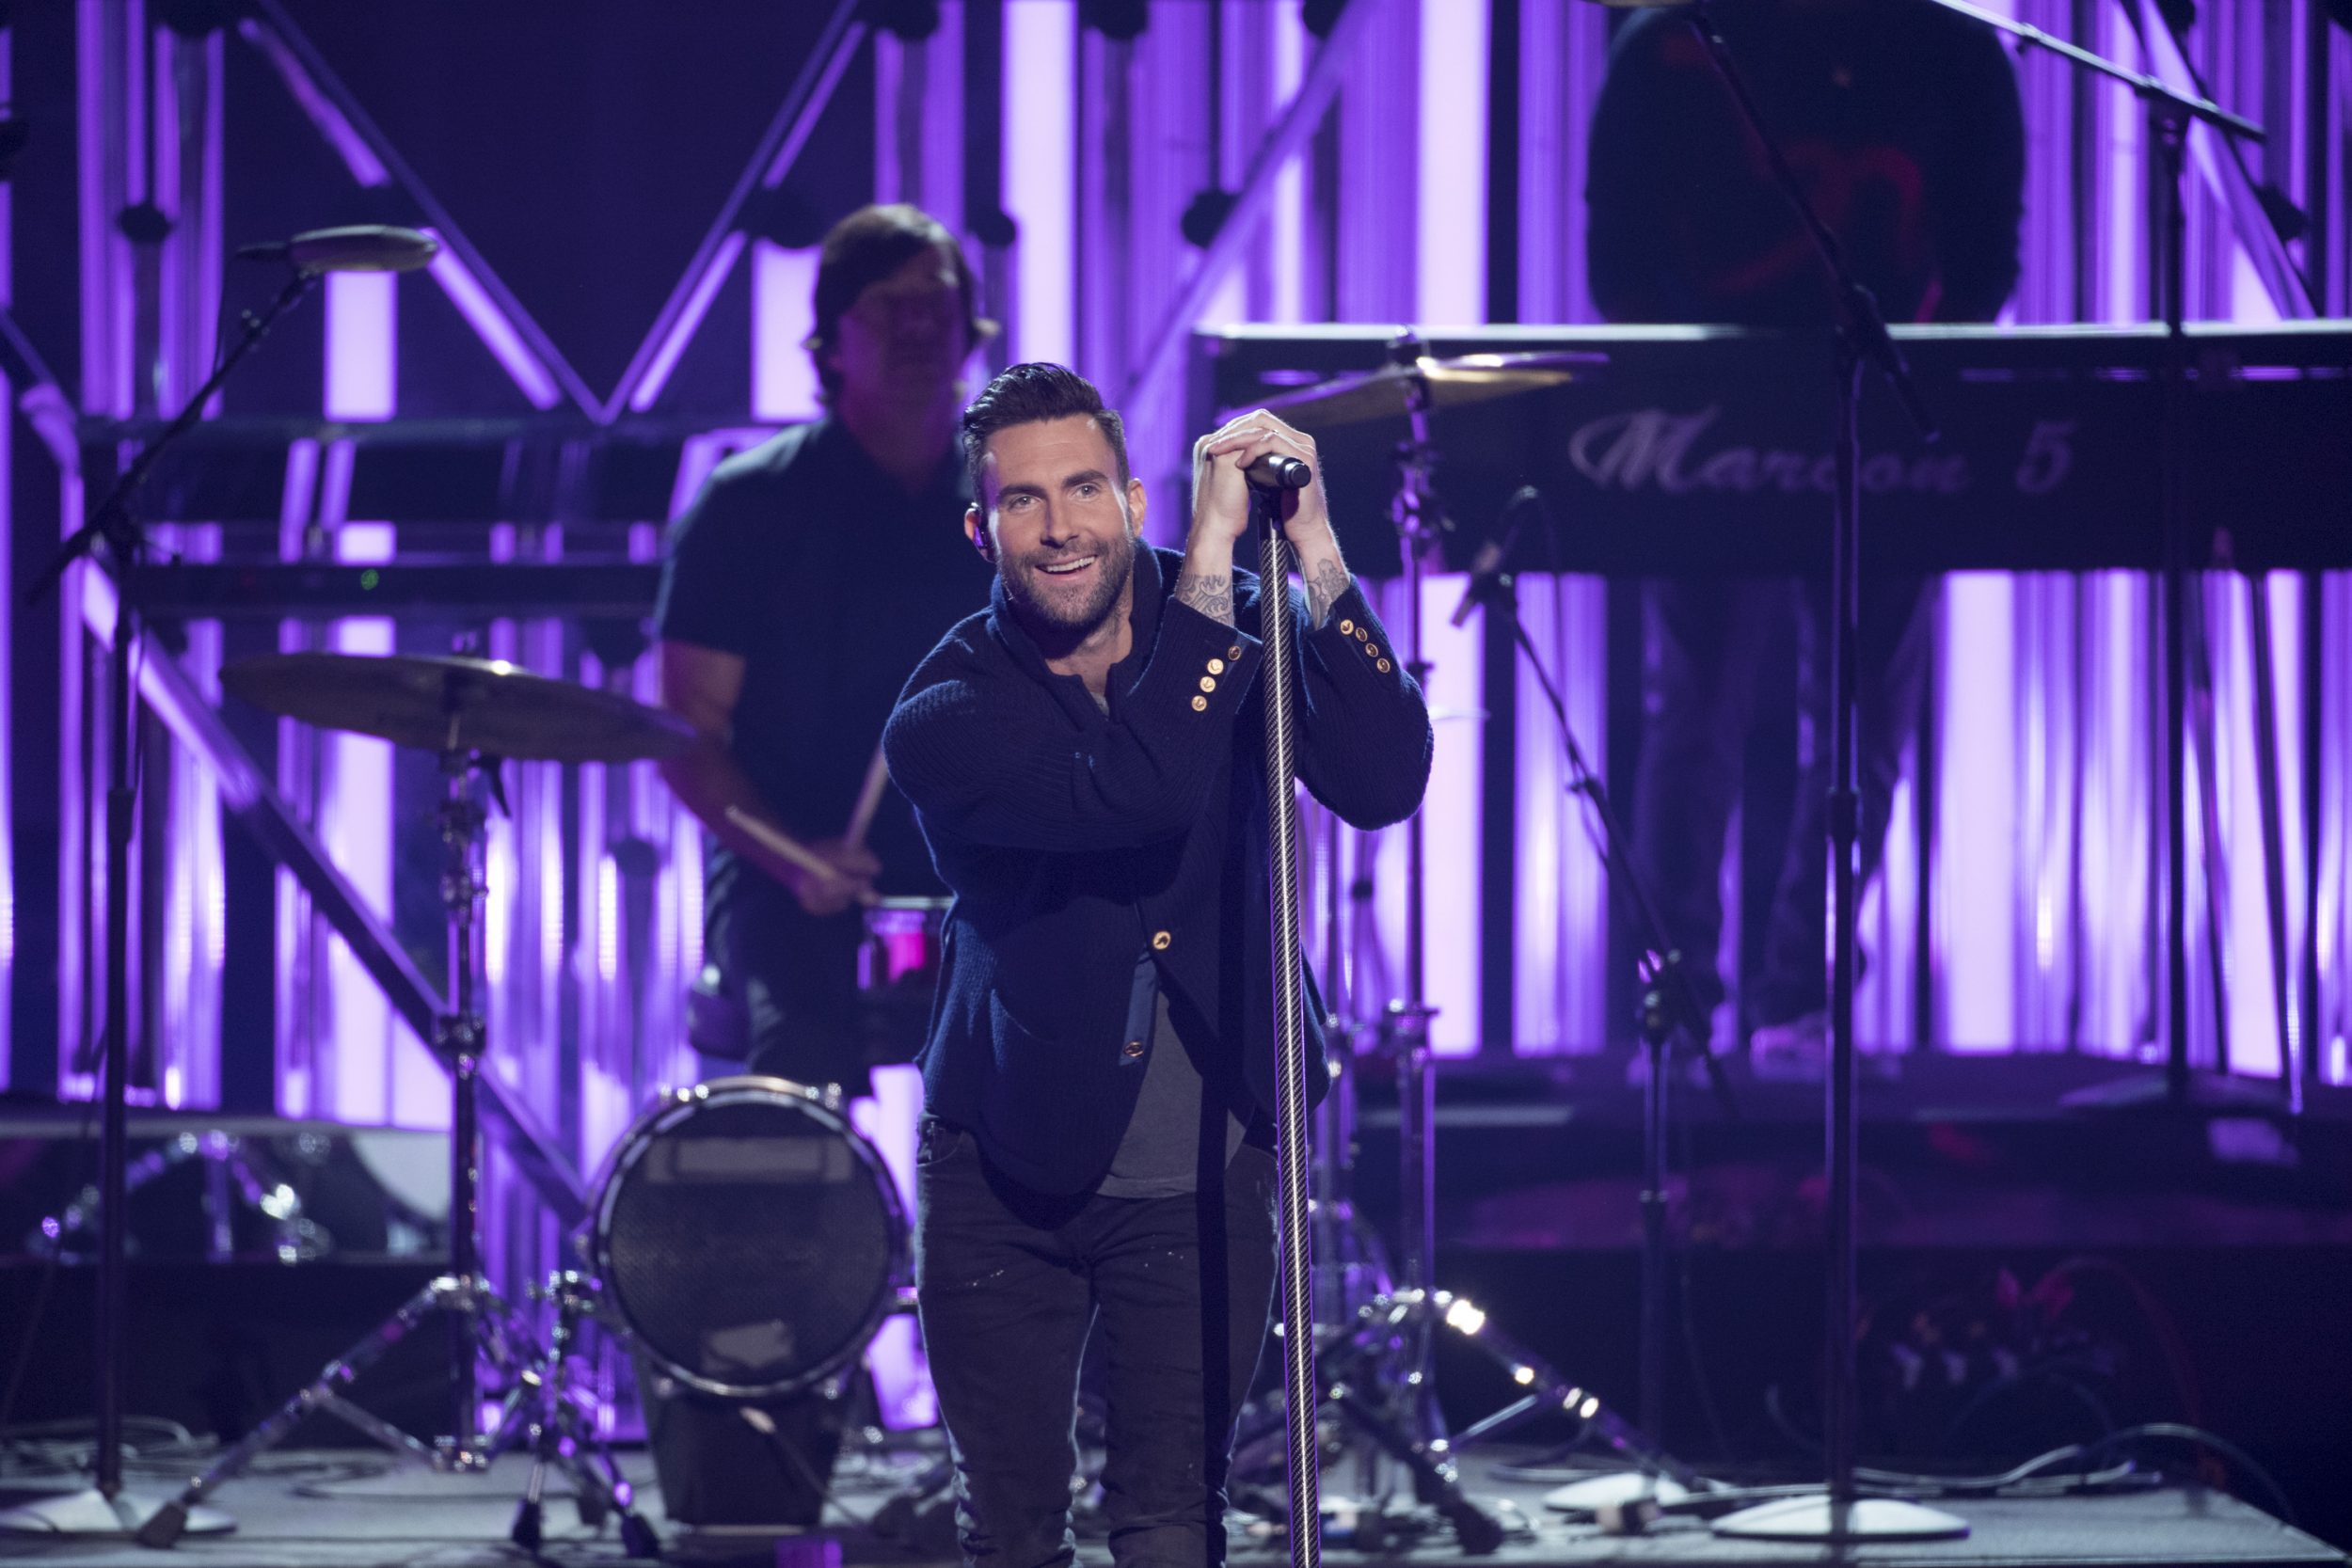 THE 2016 AMERICAN MUSIC AWARDS(r) - The “2016 American Music Awards,” the world’s biggest fan-voted award show, broadcasts live from the Microsoft Theater in Los Angeles on SUNDAY, NOVEMBER 20, at 8:00 p.m. EST, on ABC. (Image Group LA/ABC) MAROON 5